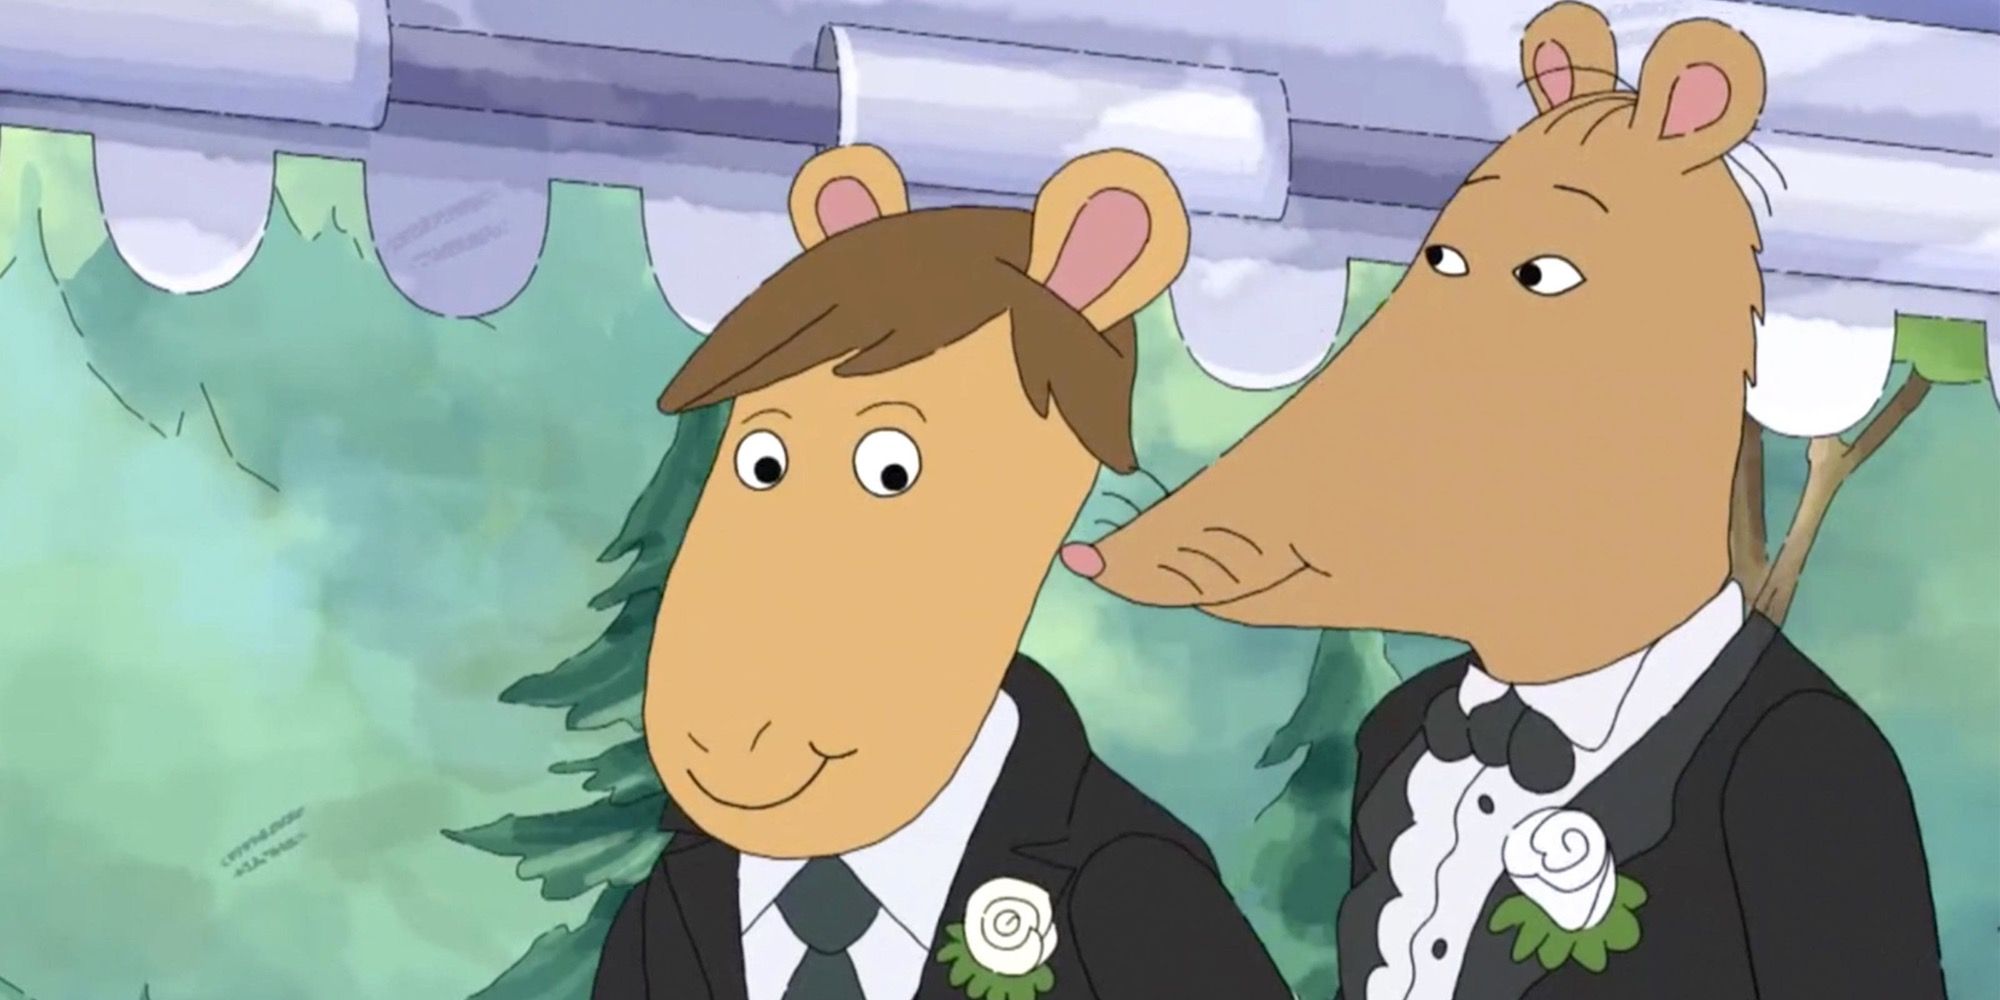 Alabama Public Television Refuses to Air Arthurs Gay Marriage Episode